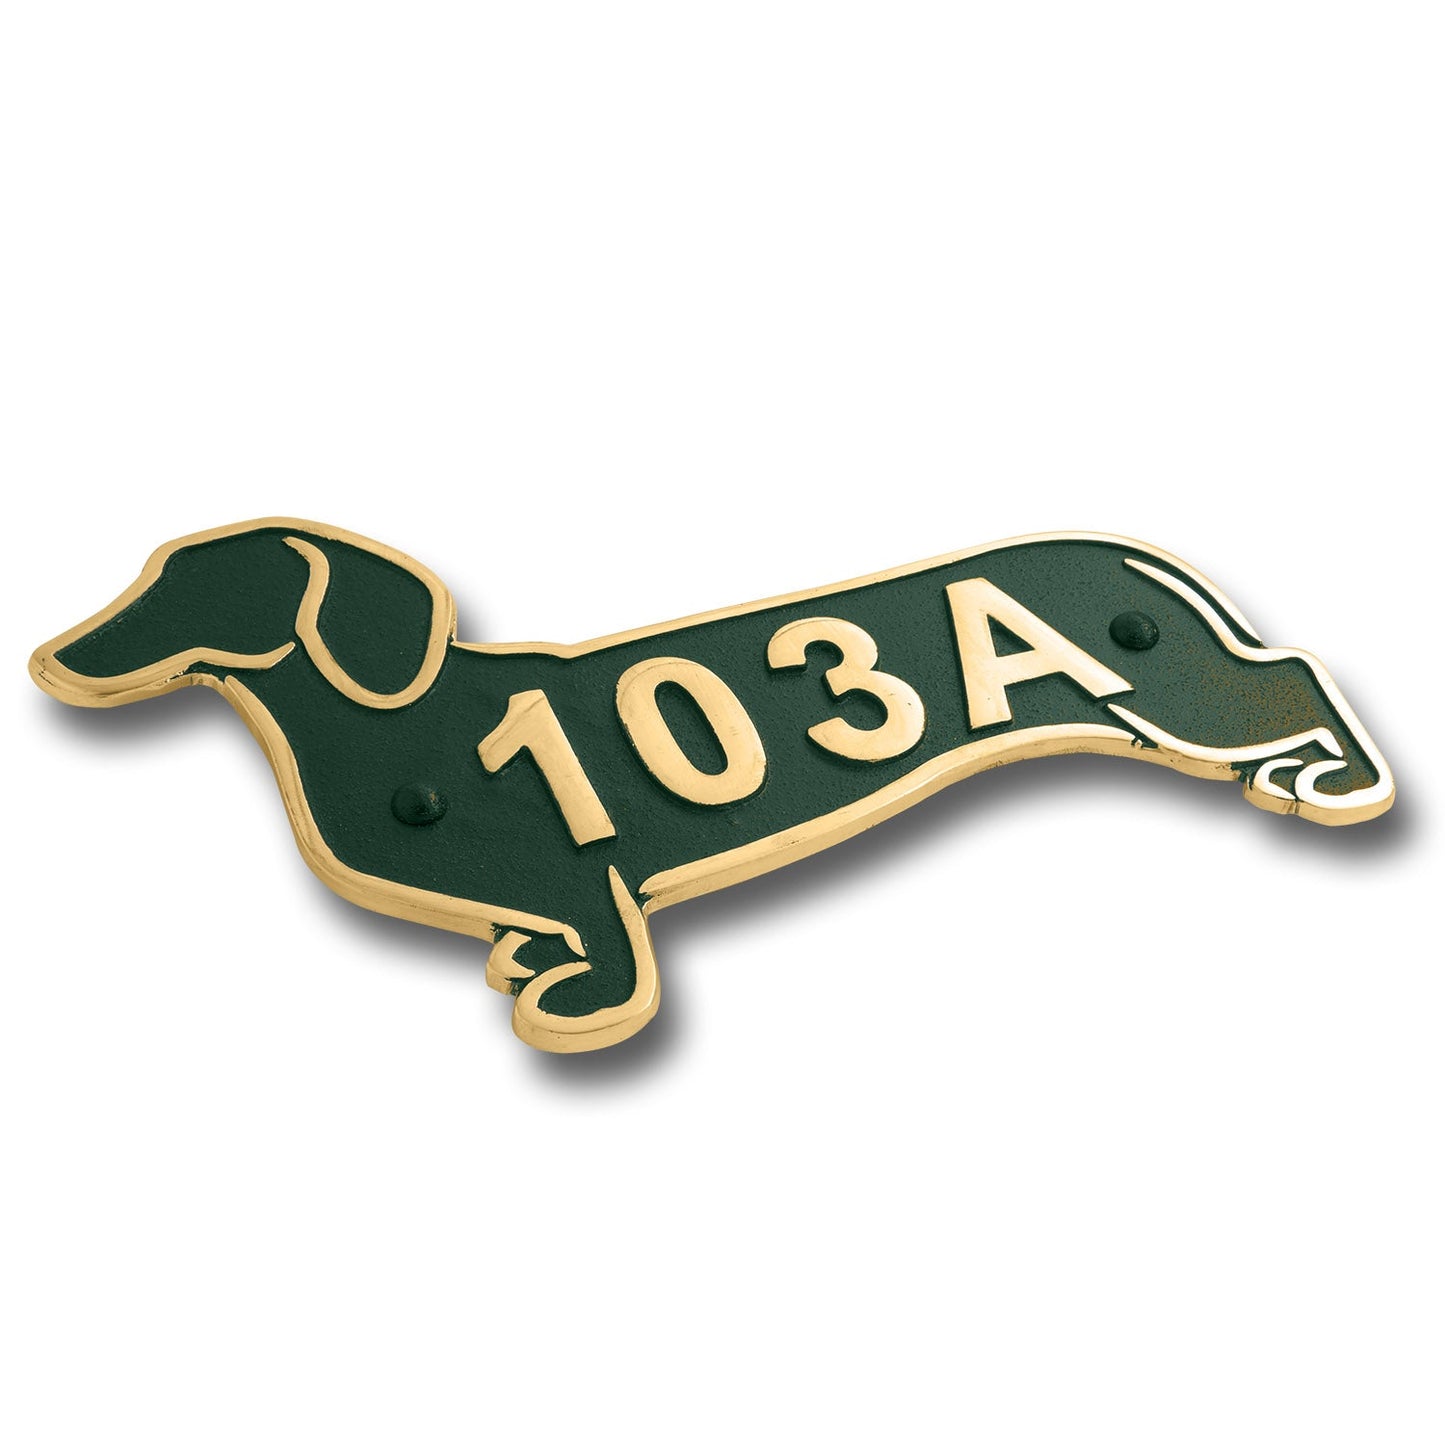 Dachshund House Number Plaque - The Metal Foundry